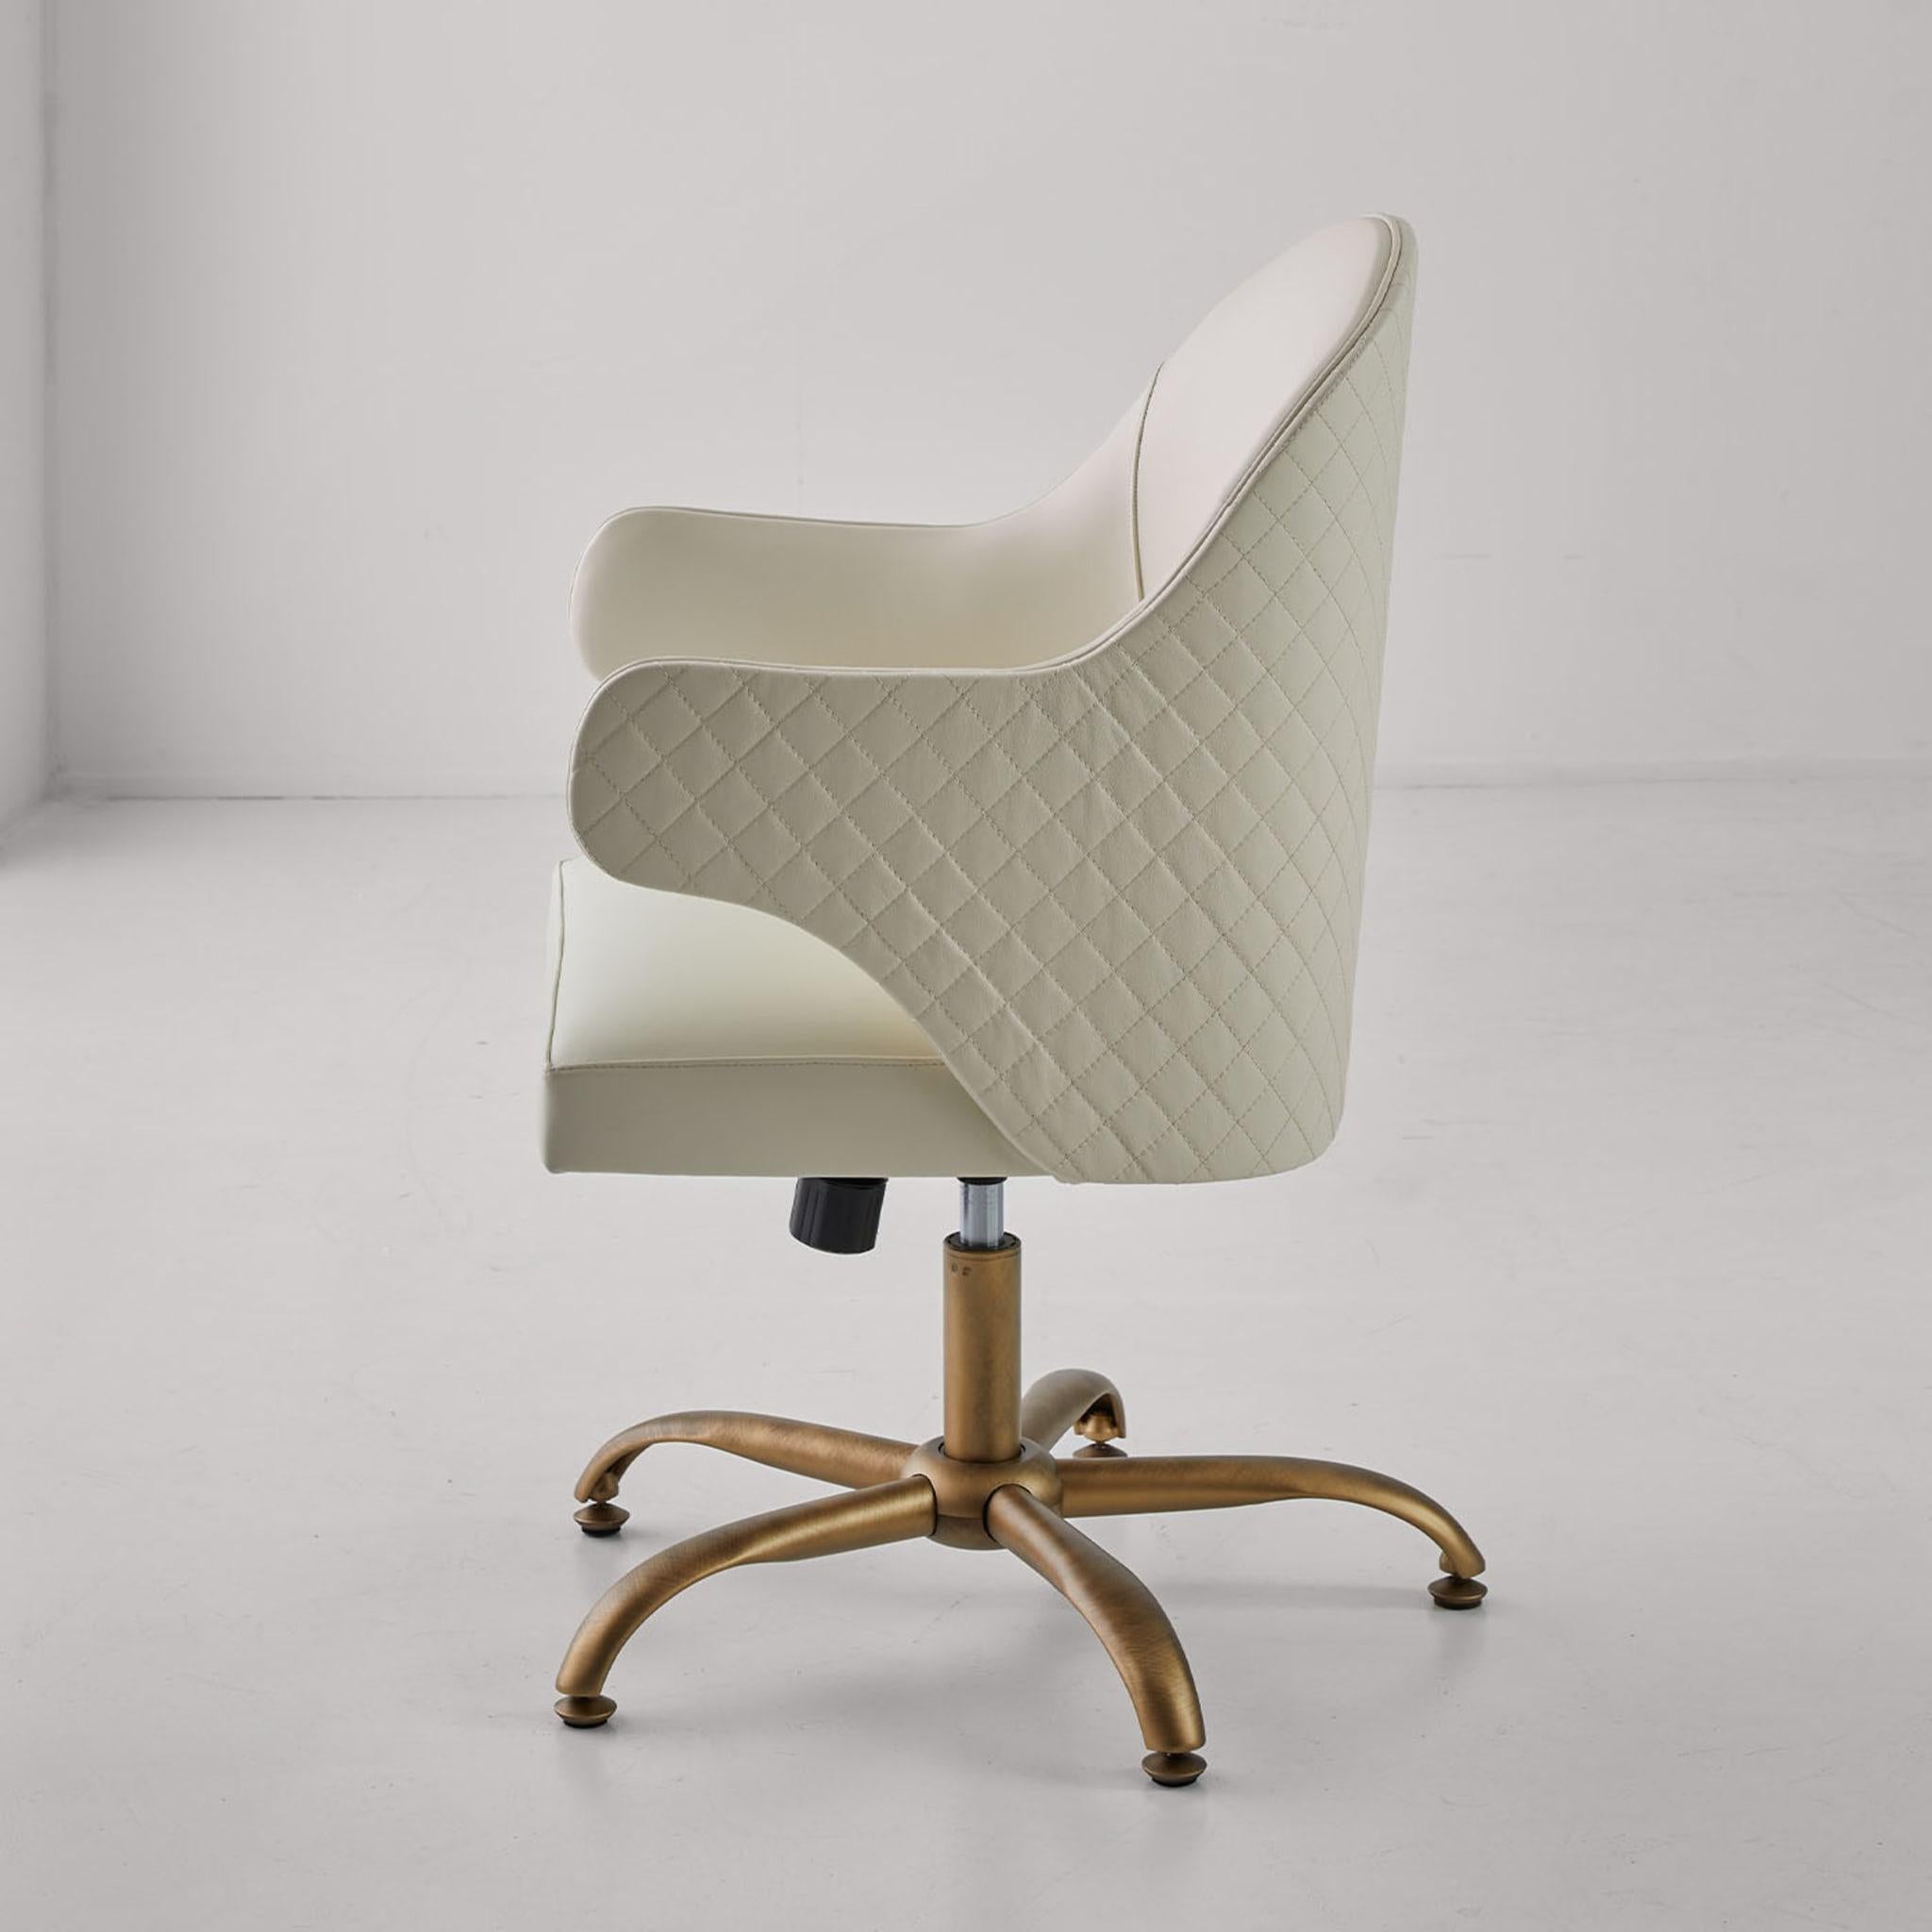 Swivel and height-adjustable chair with bronze lacquered base and entirely upholstered in leather with quilting on the back.